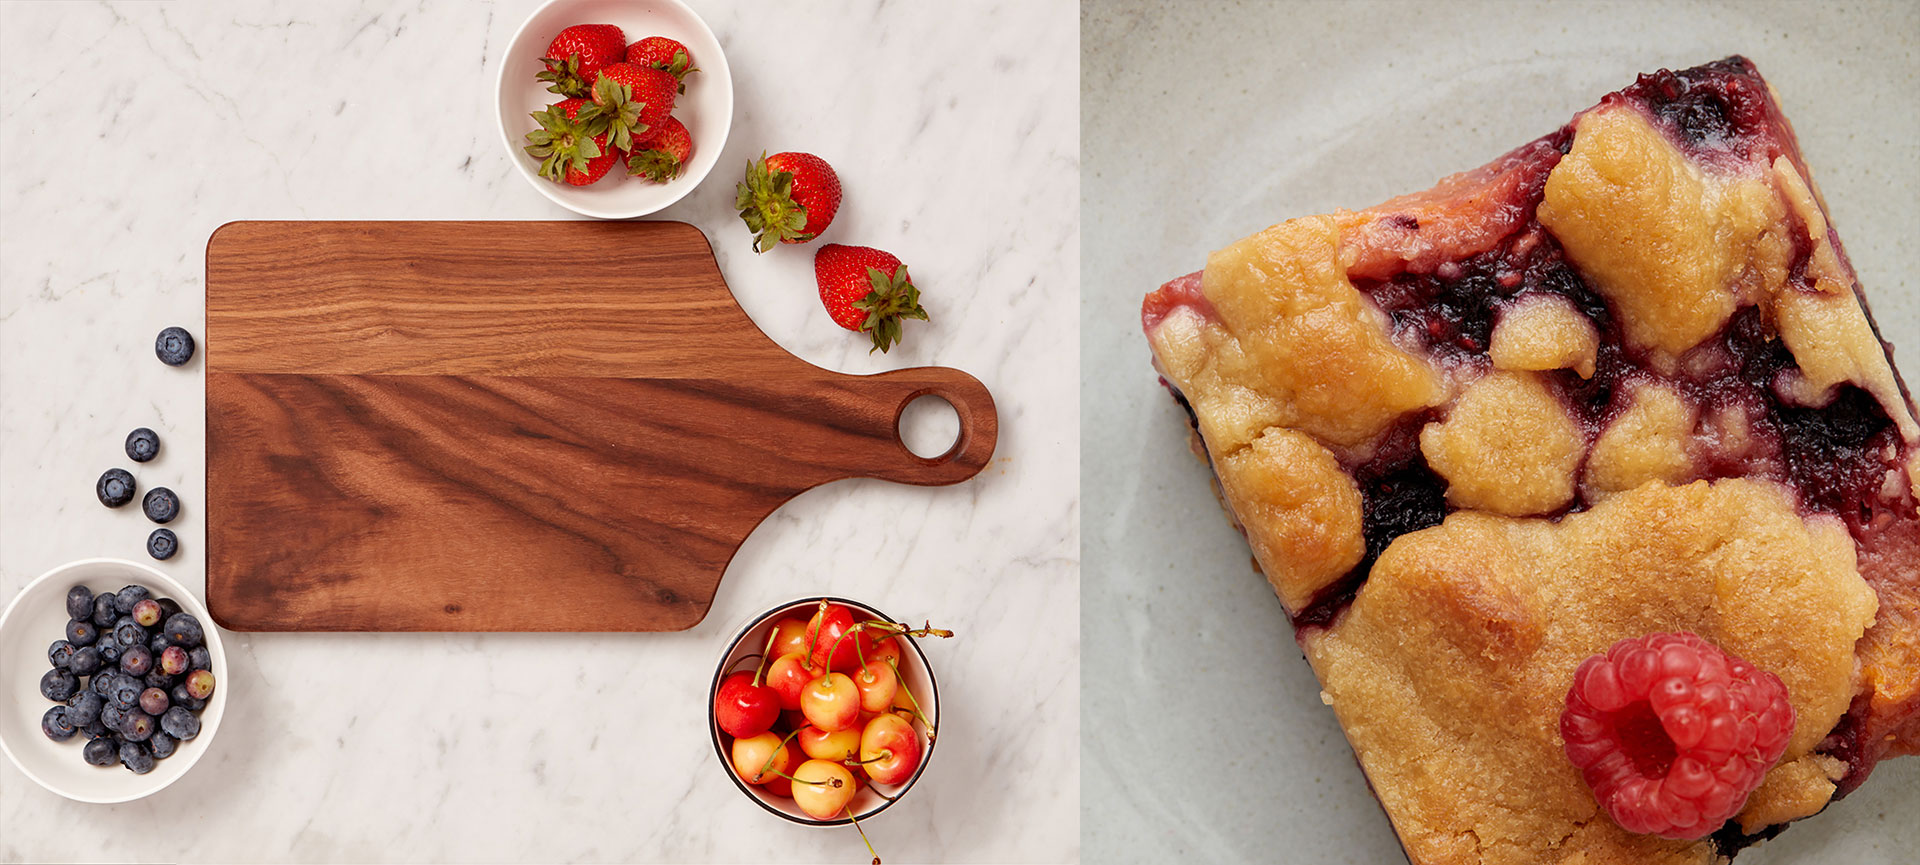 Wooden cutting board with fruit bowls and raspberry bar photographed by food and beverage photographer Kate Benson.